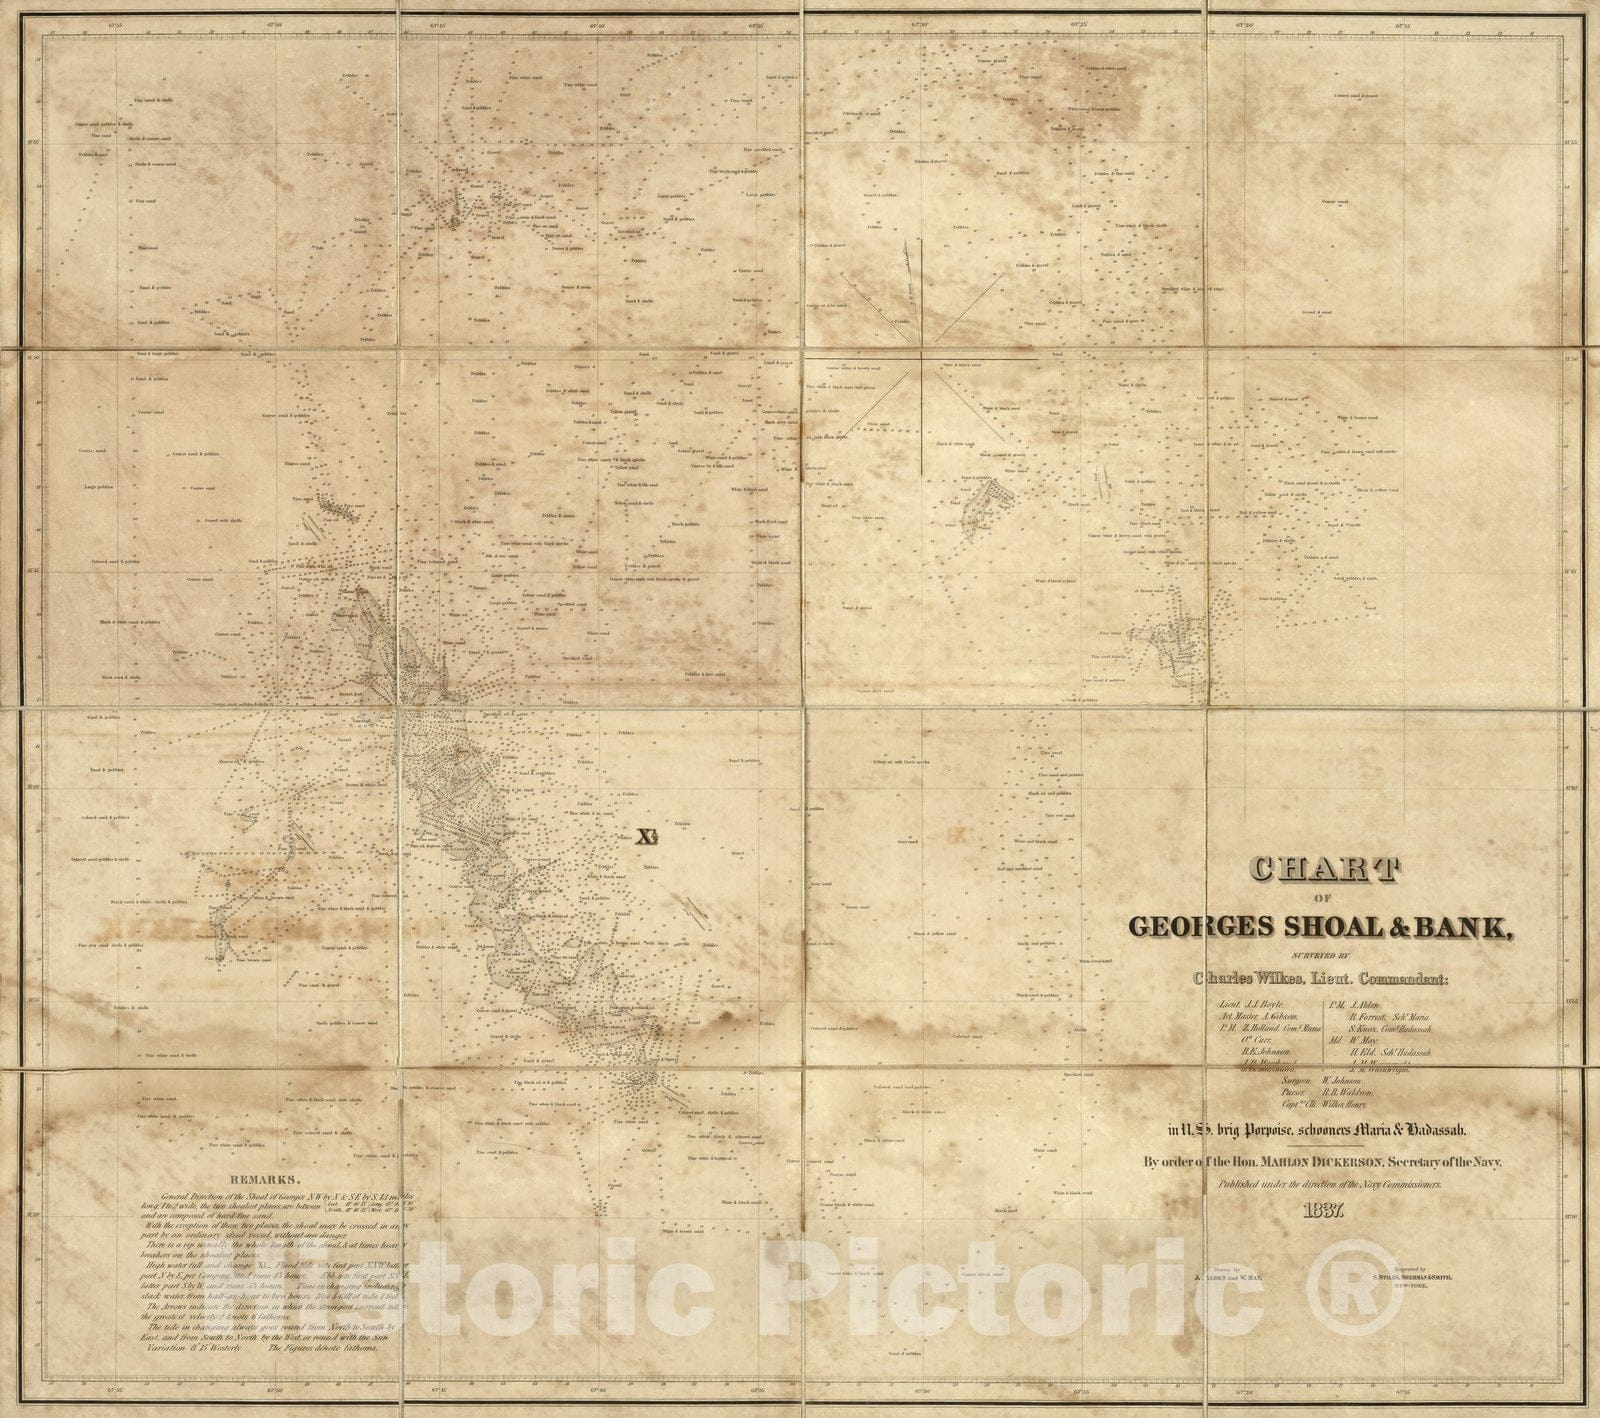 Historic Map : Case Map, Chart of Georges Shoal & Bank. 1837 - Vintage Wall Art